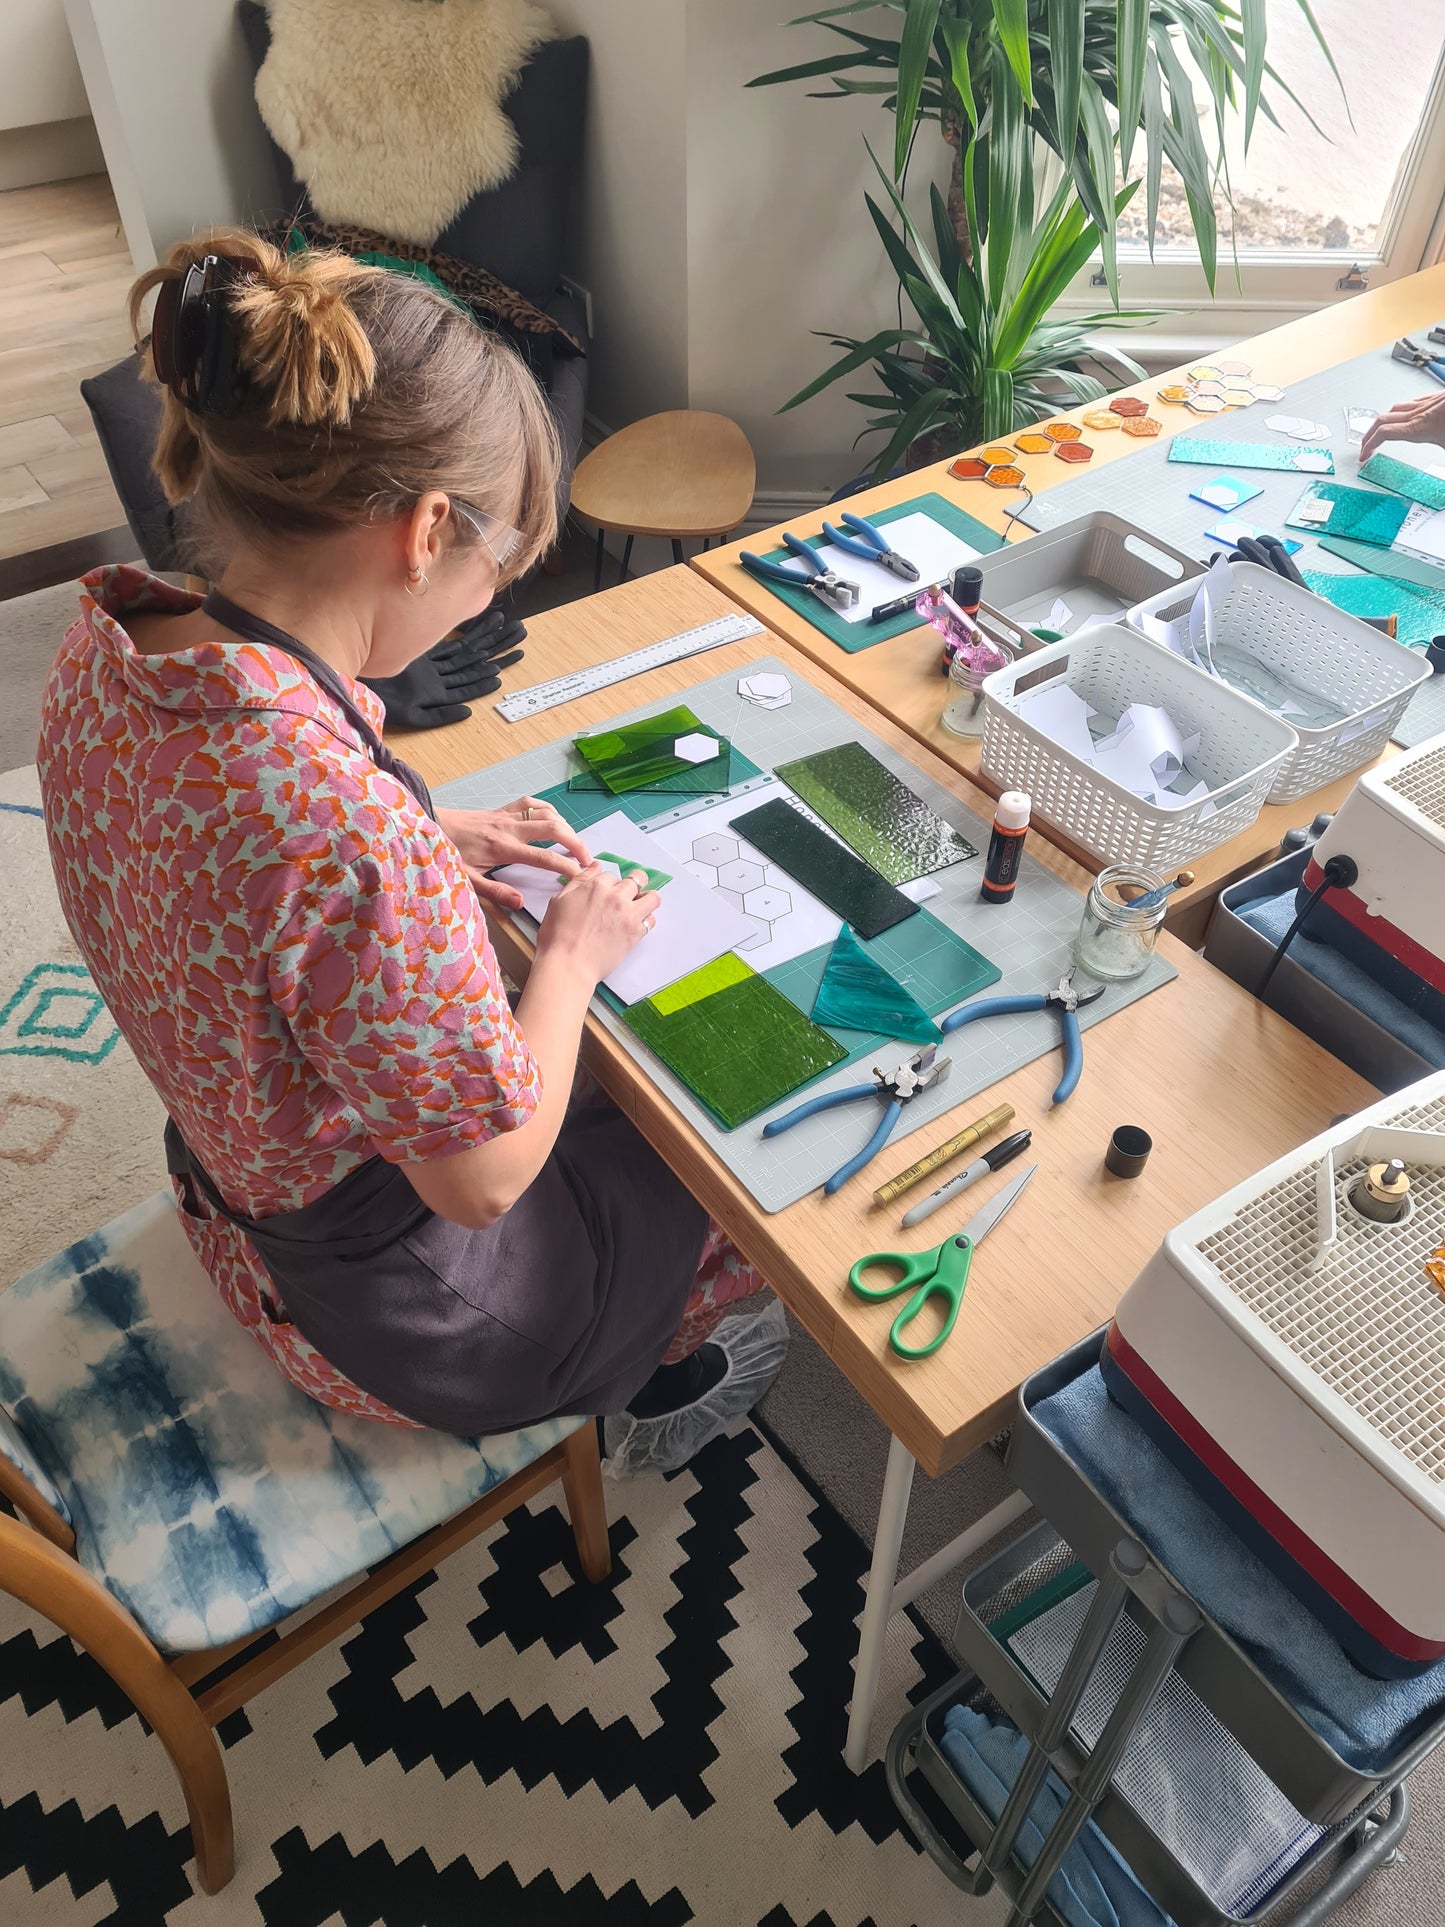 Beginners Stained Glass Workshop - Panoramic Sea View